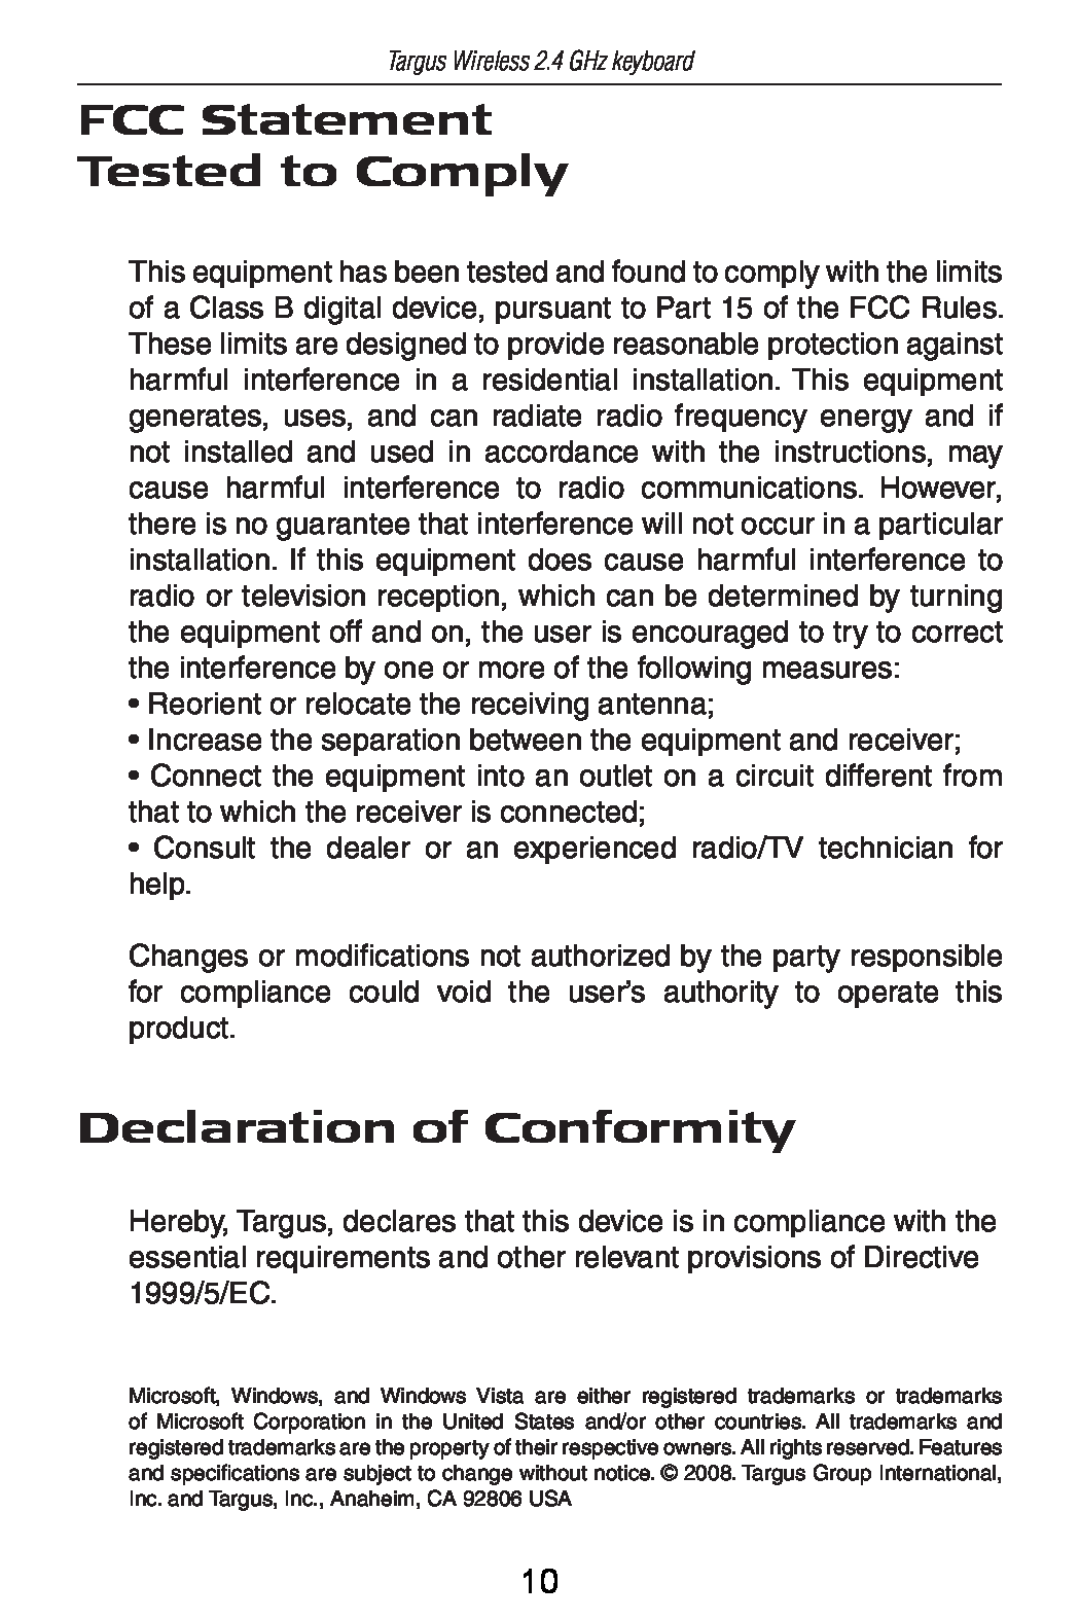 Targus AKB24US FCC Statement Tested to Comply, Declaration of Conformity, Reorient or relocate the receiving antenna 